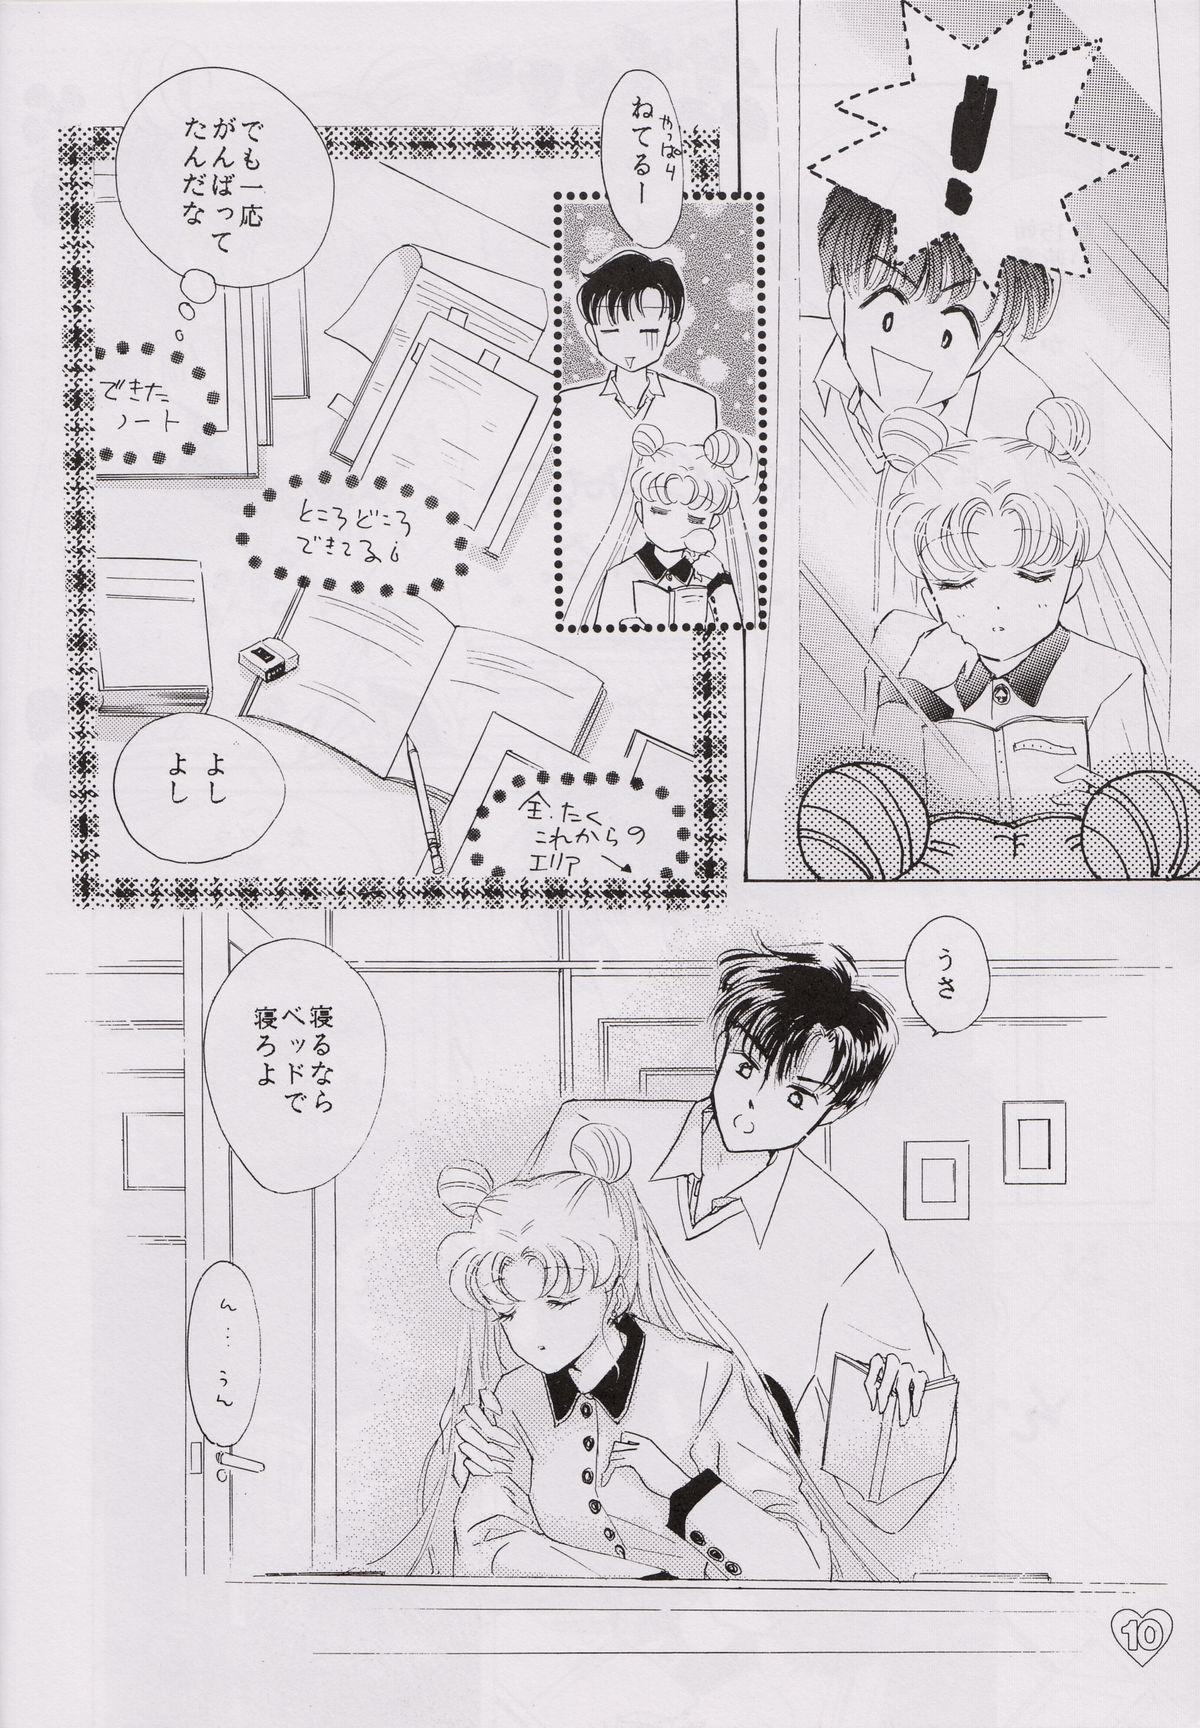 Euro EARTH WIND - Sailor moon Master - Page 9